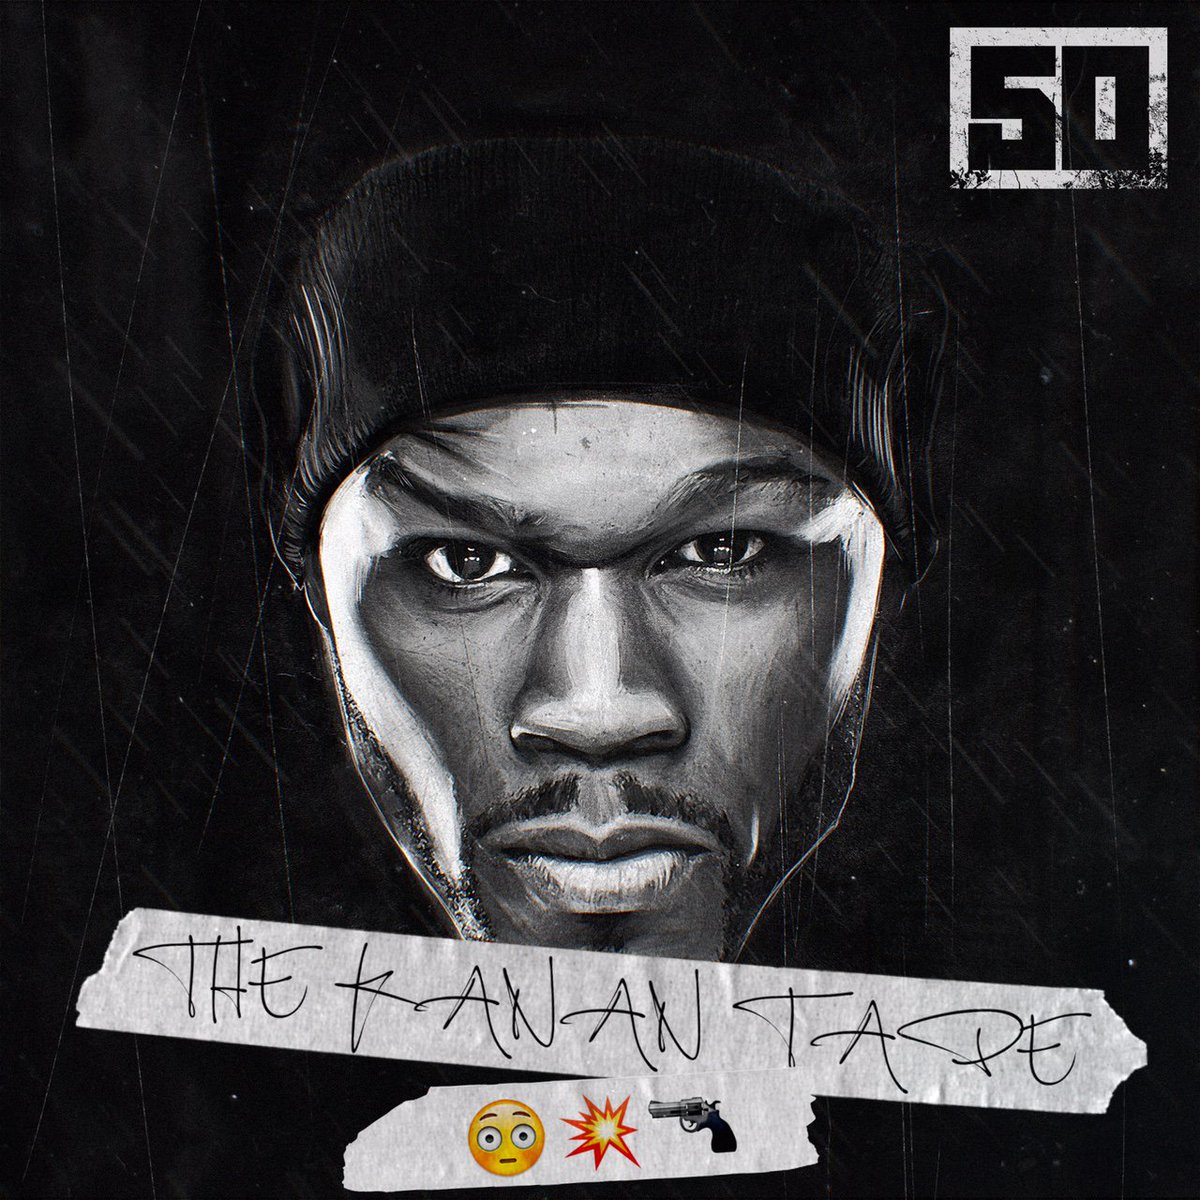 RT @thisis50: Fire! @50cent just dropped a new track 